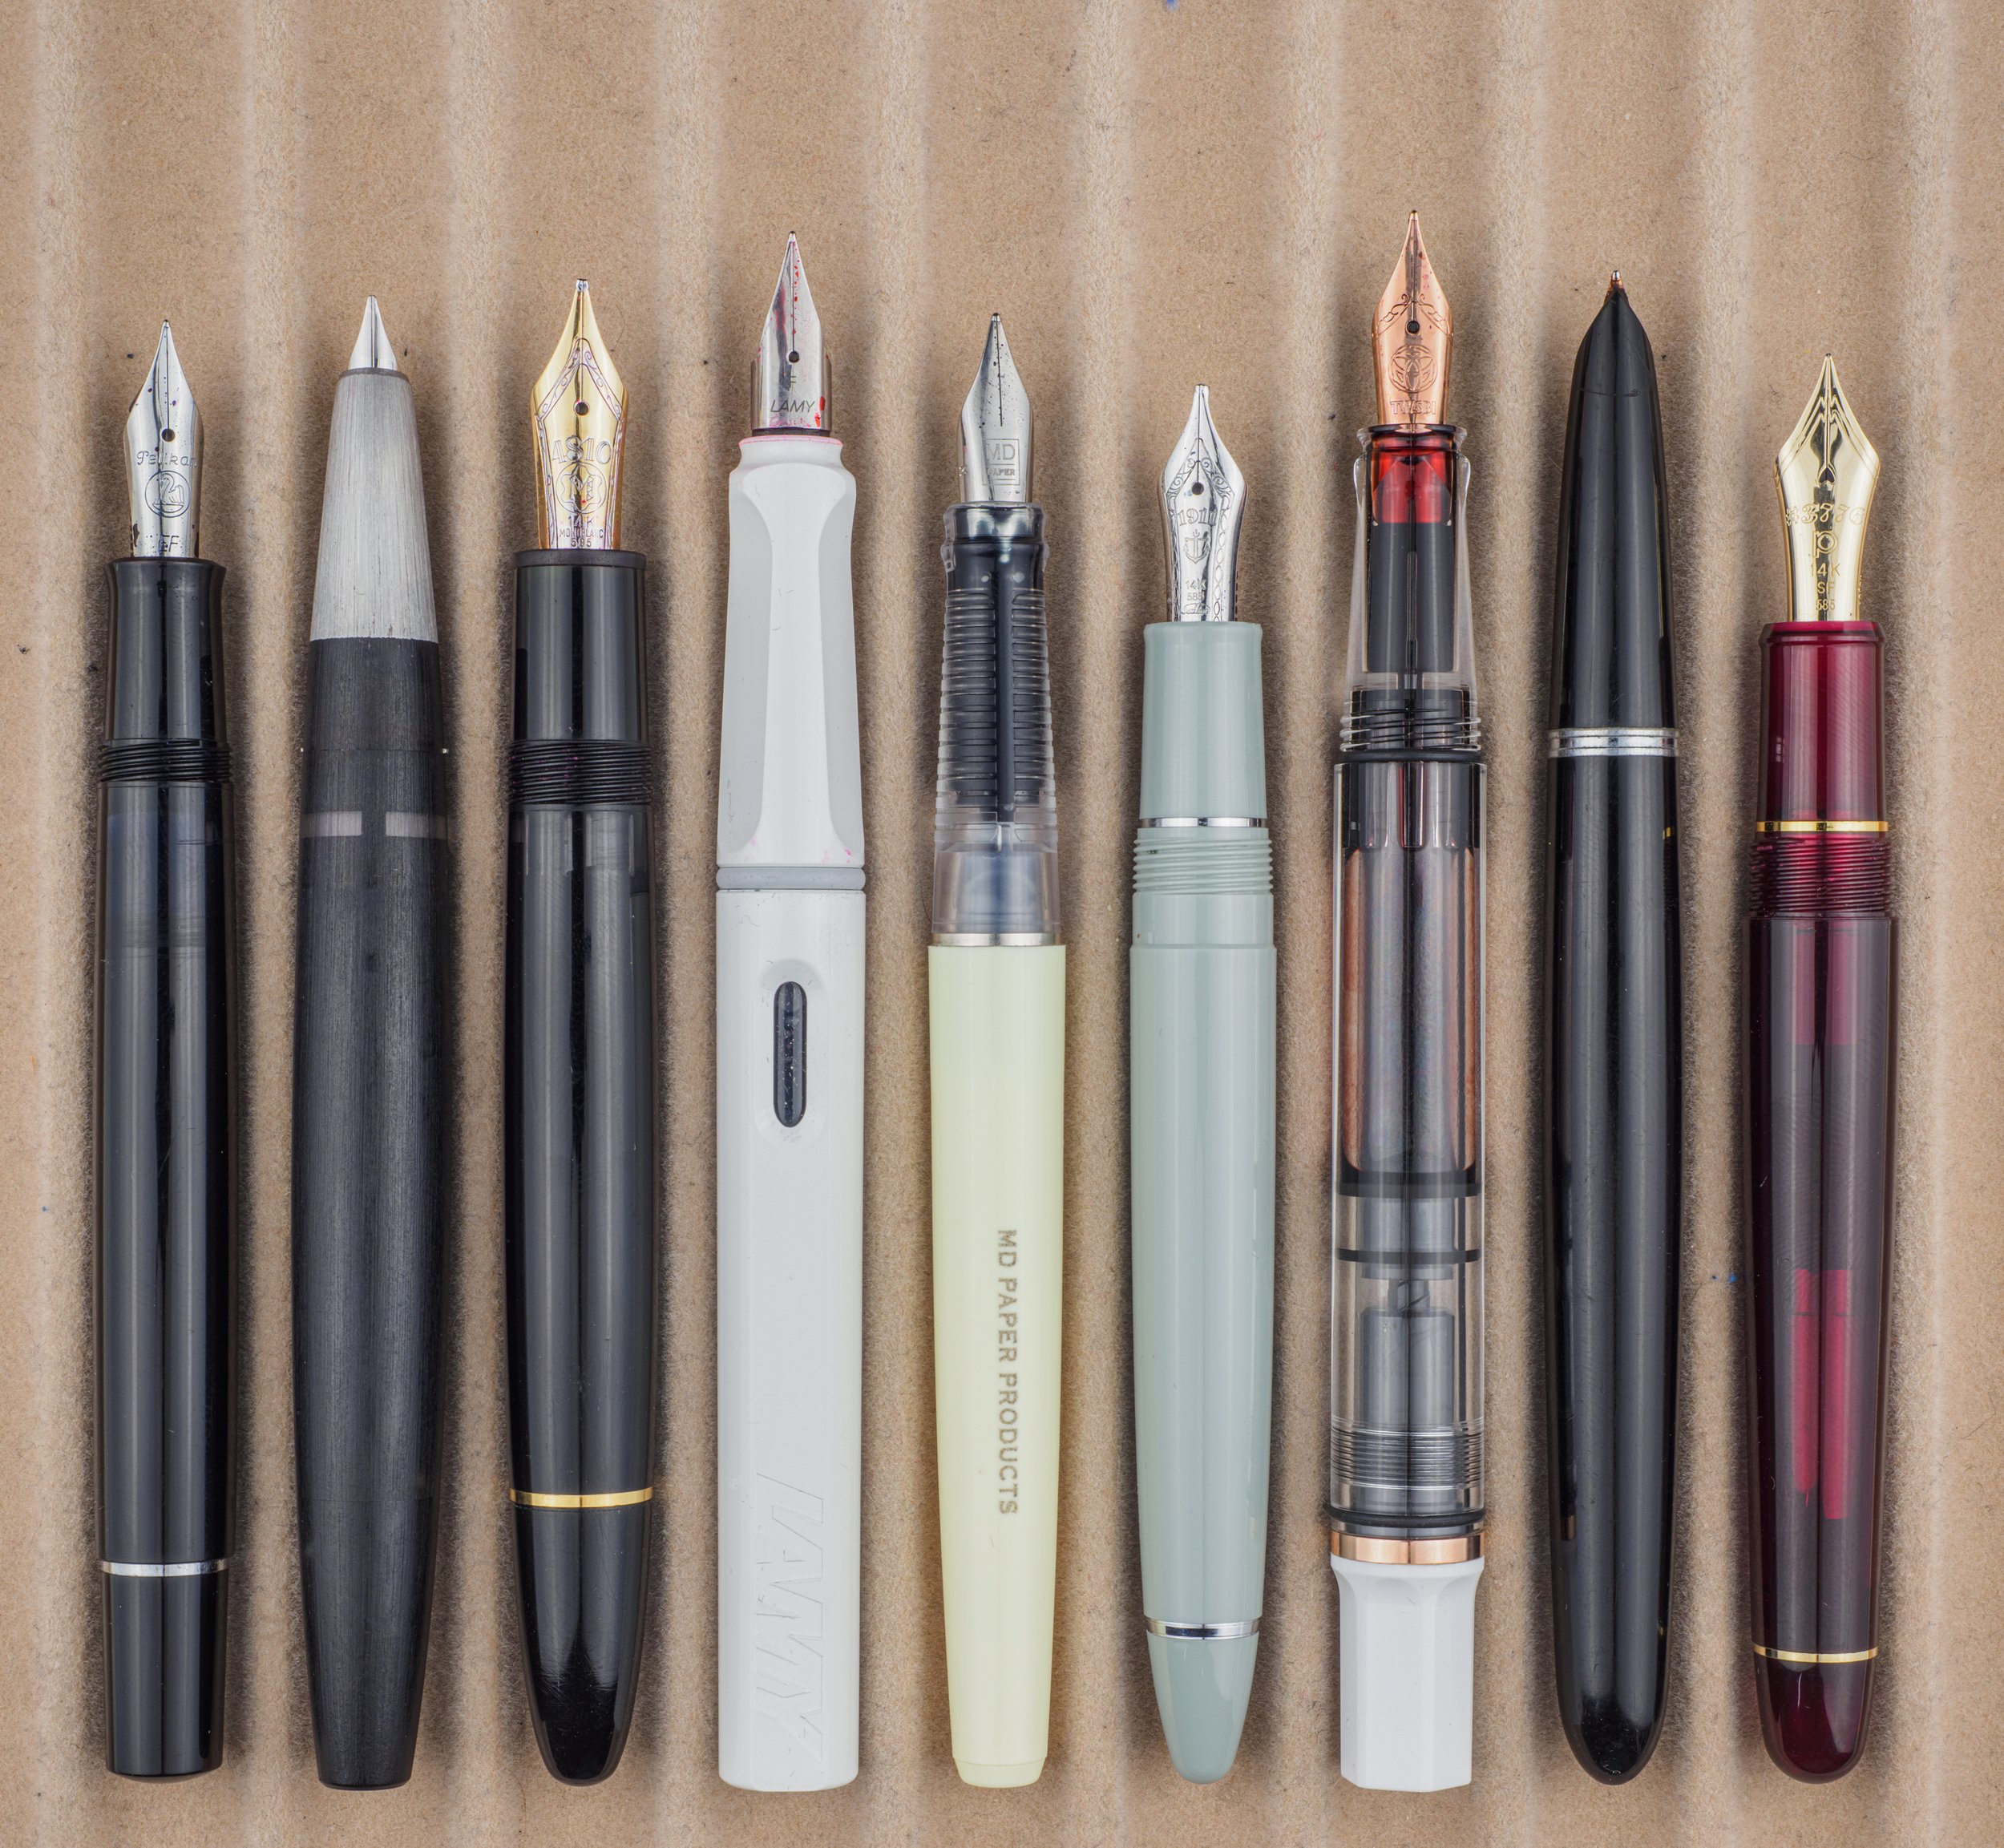 MD Dip Pen  MD PAPER PRODUCTS